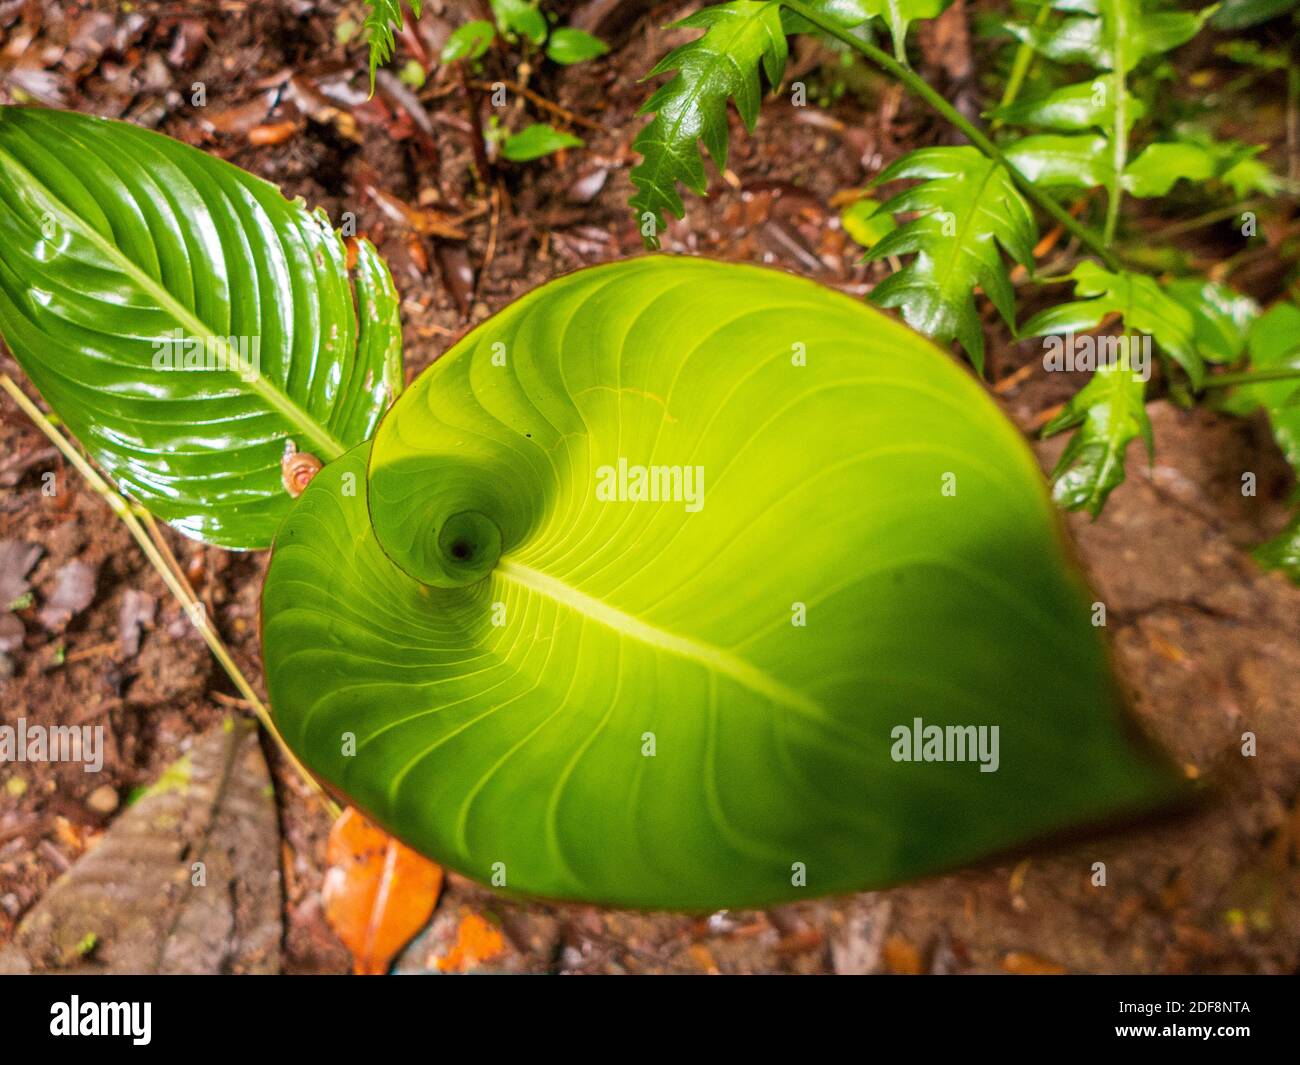 The rainforest of Costa Rica. Banana leaves and other large-leaved plants grow on the bottom of the tropical forest. Stock Photo